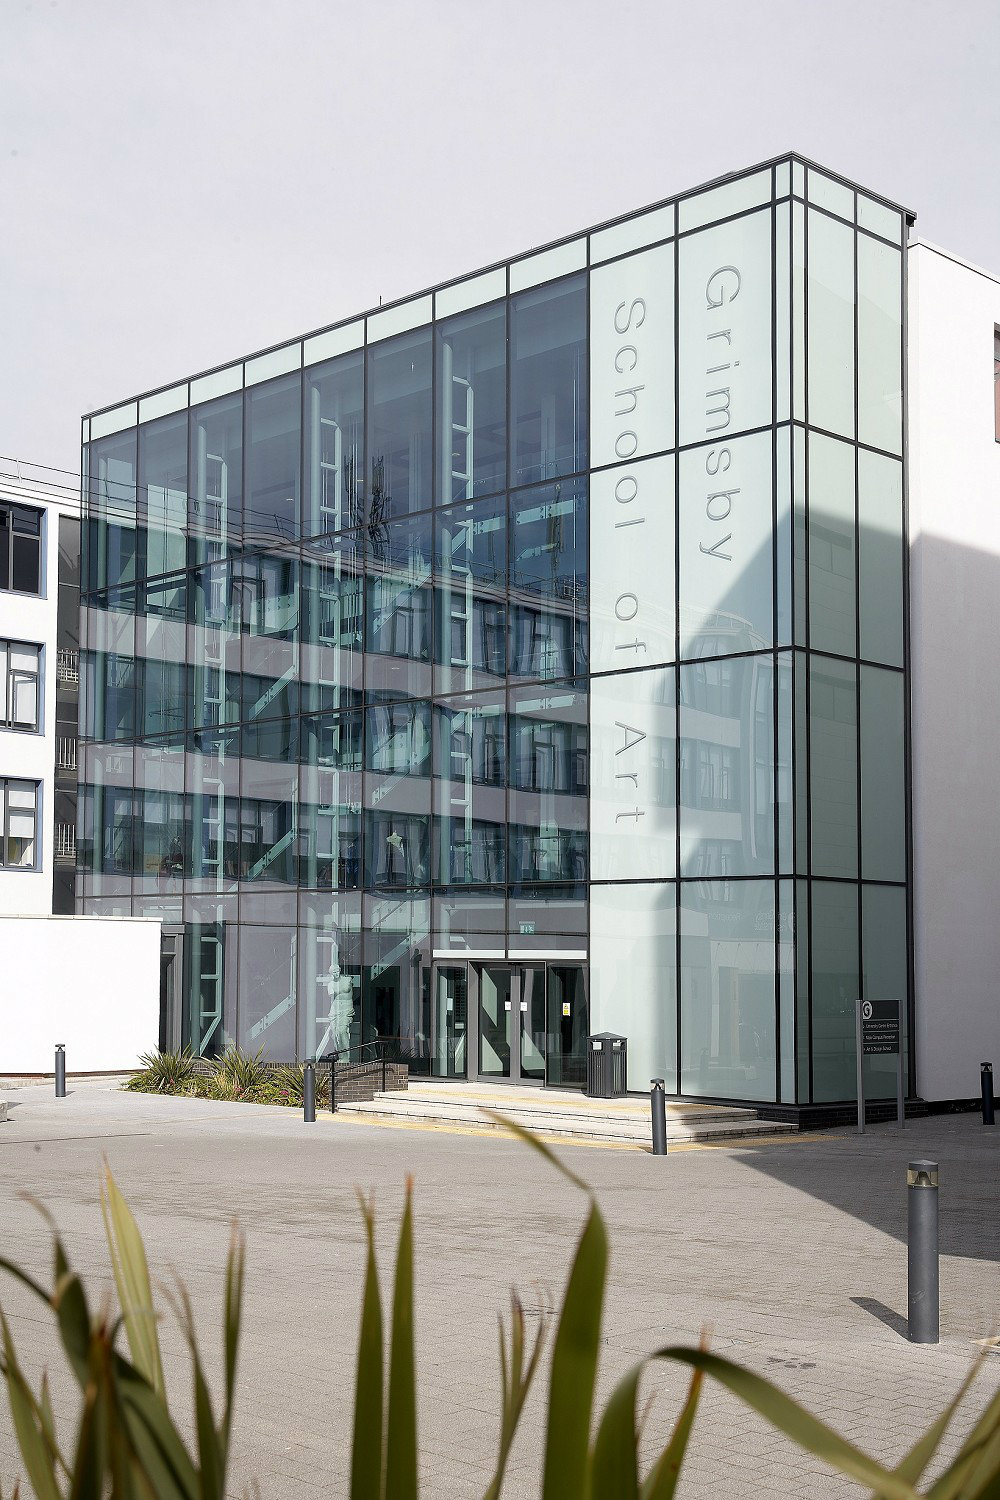 Curtain walling and aluminium windows on a college building